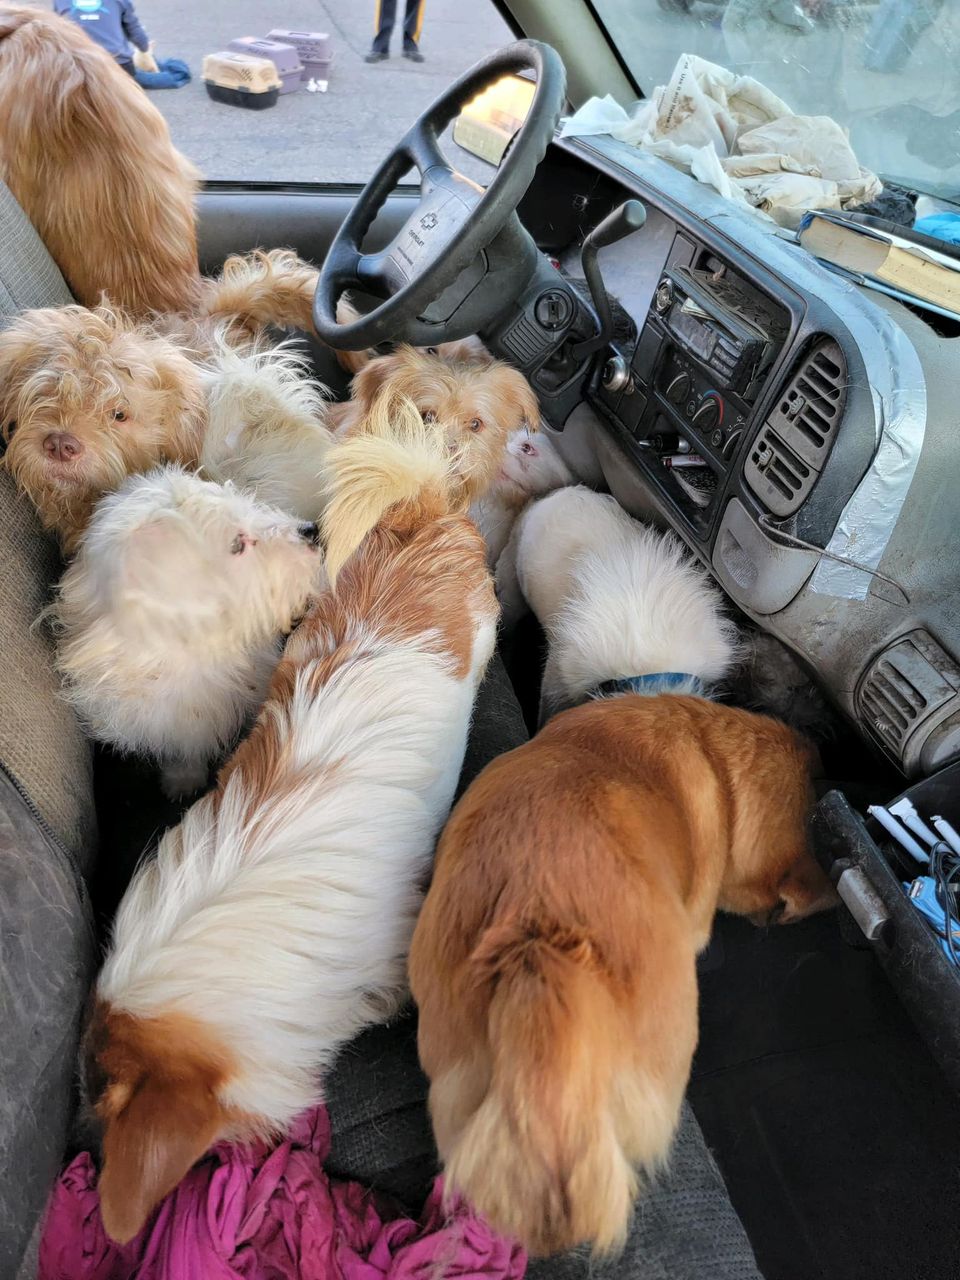 DOZENS OF ANIMALS, ALIVE AND DEAD, FOUND IN PICKUP...